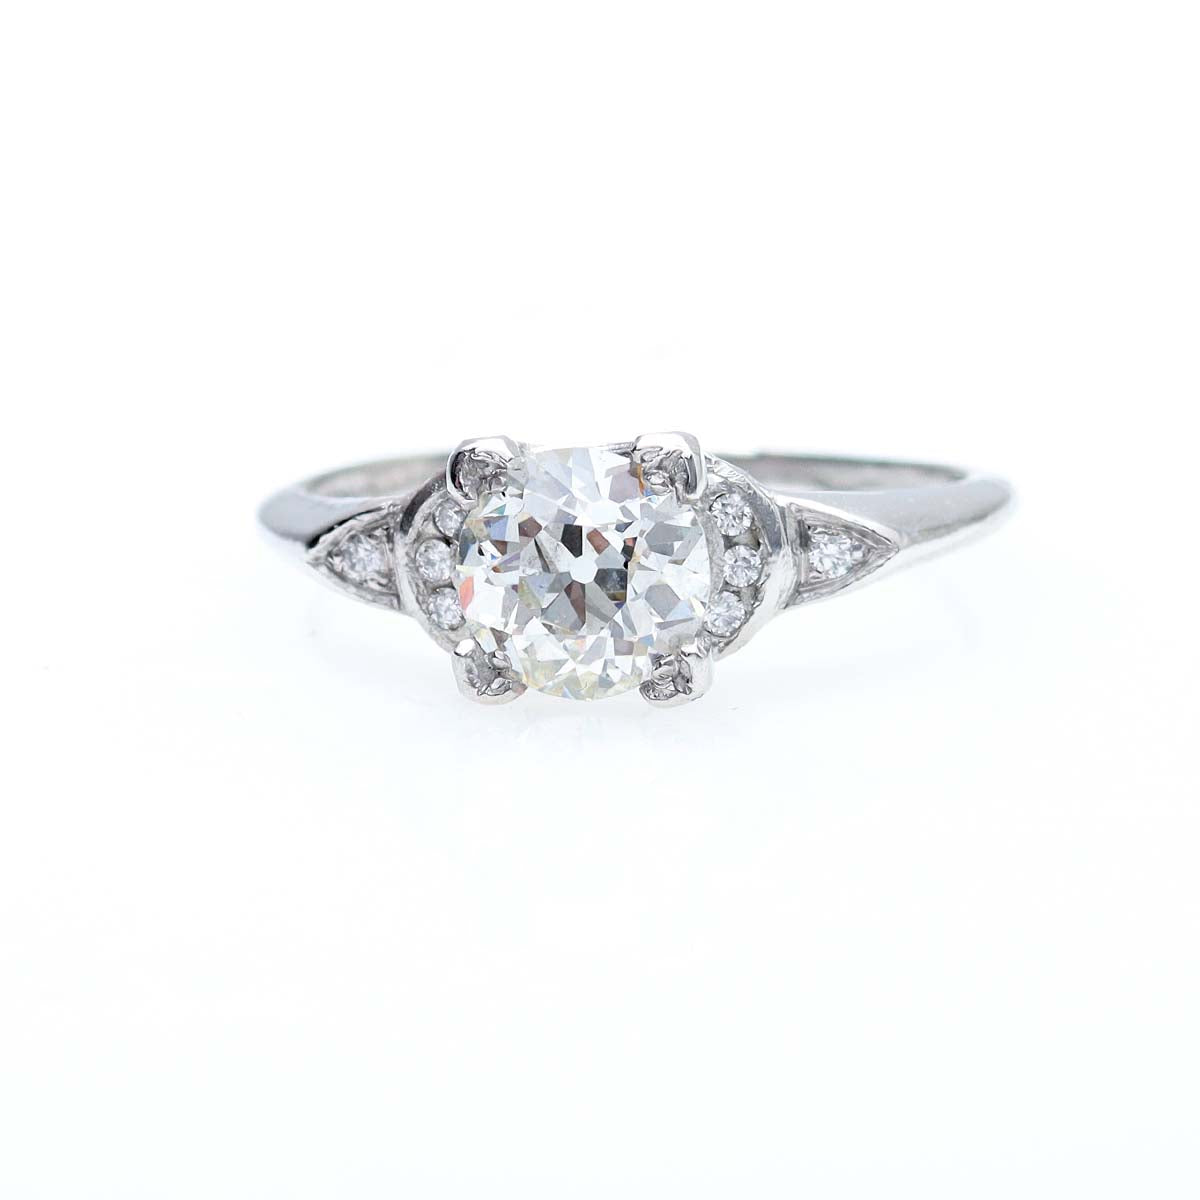 Replica Art Deco Engagement Ring with Old European Cut Diamond #3024-5